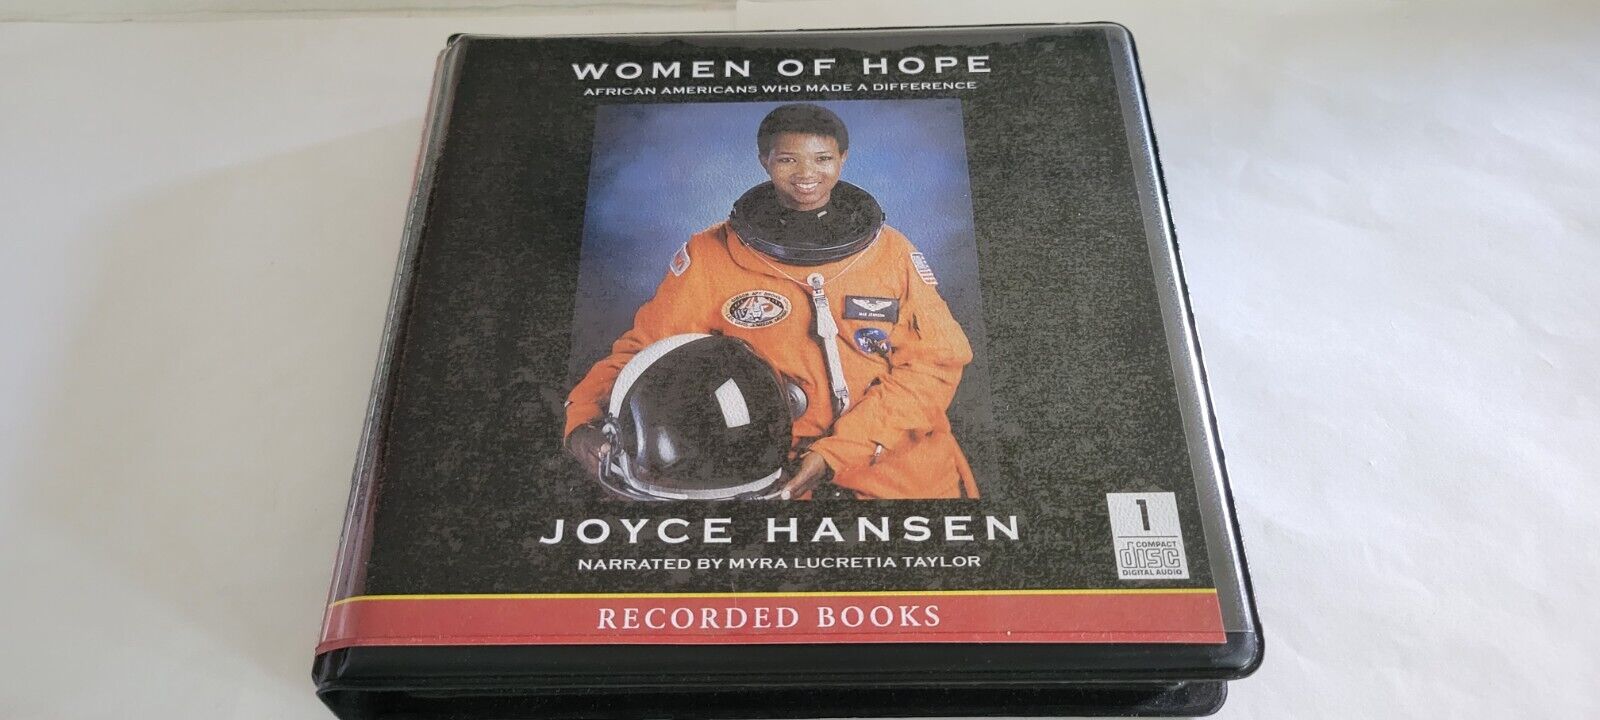 Women of Hope: African Americans Who Made a Difference by Joyce Hansen CD